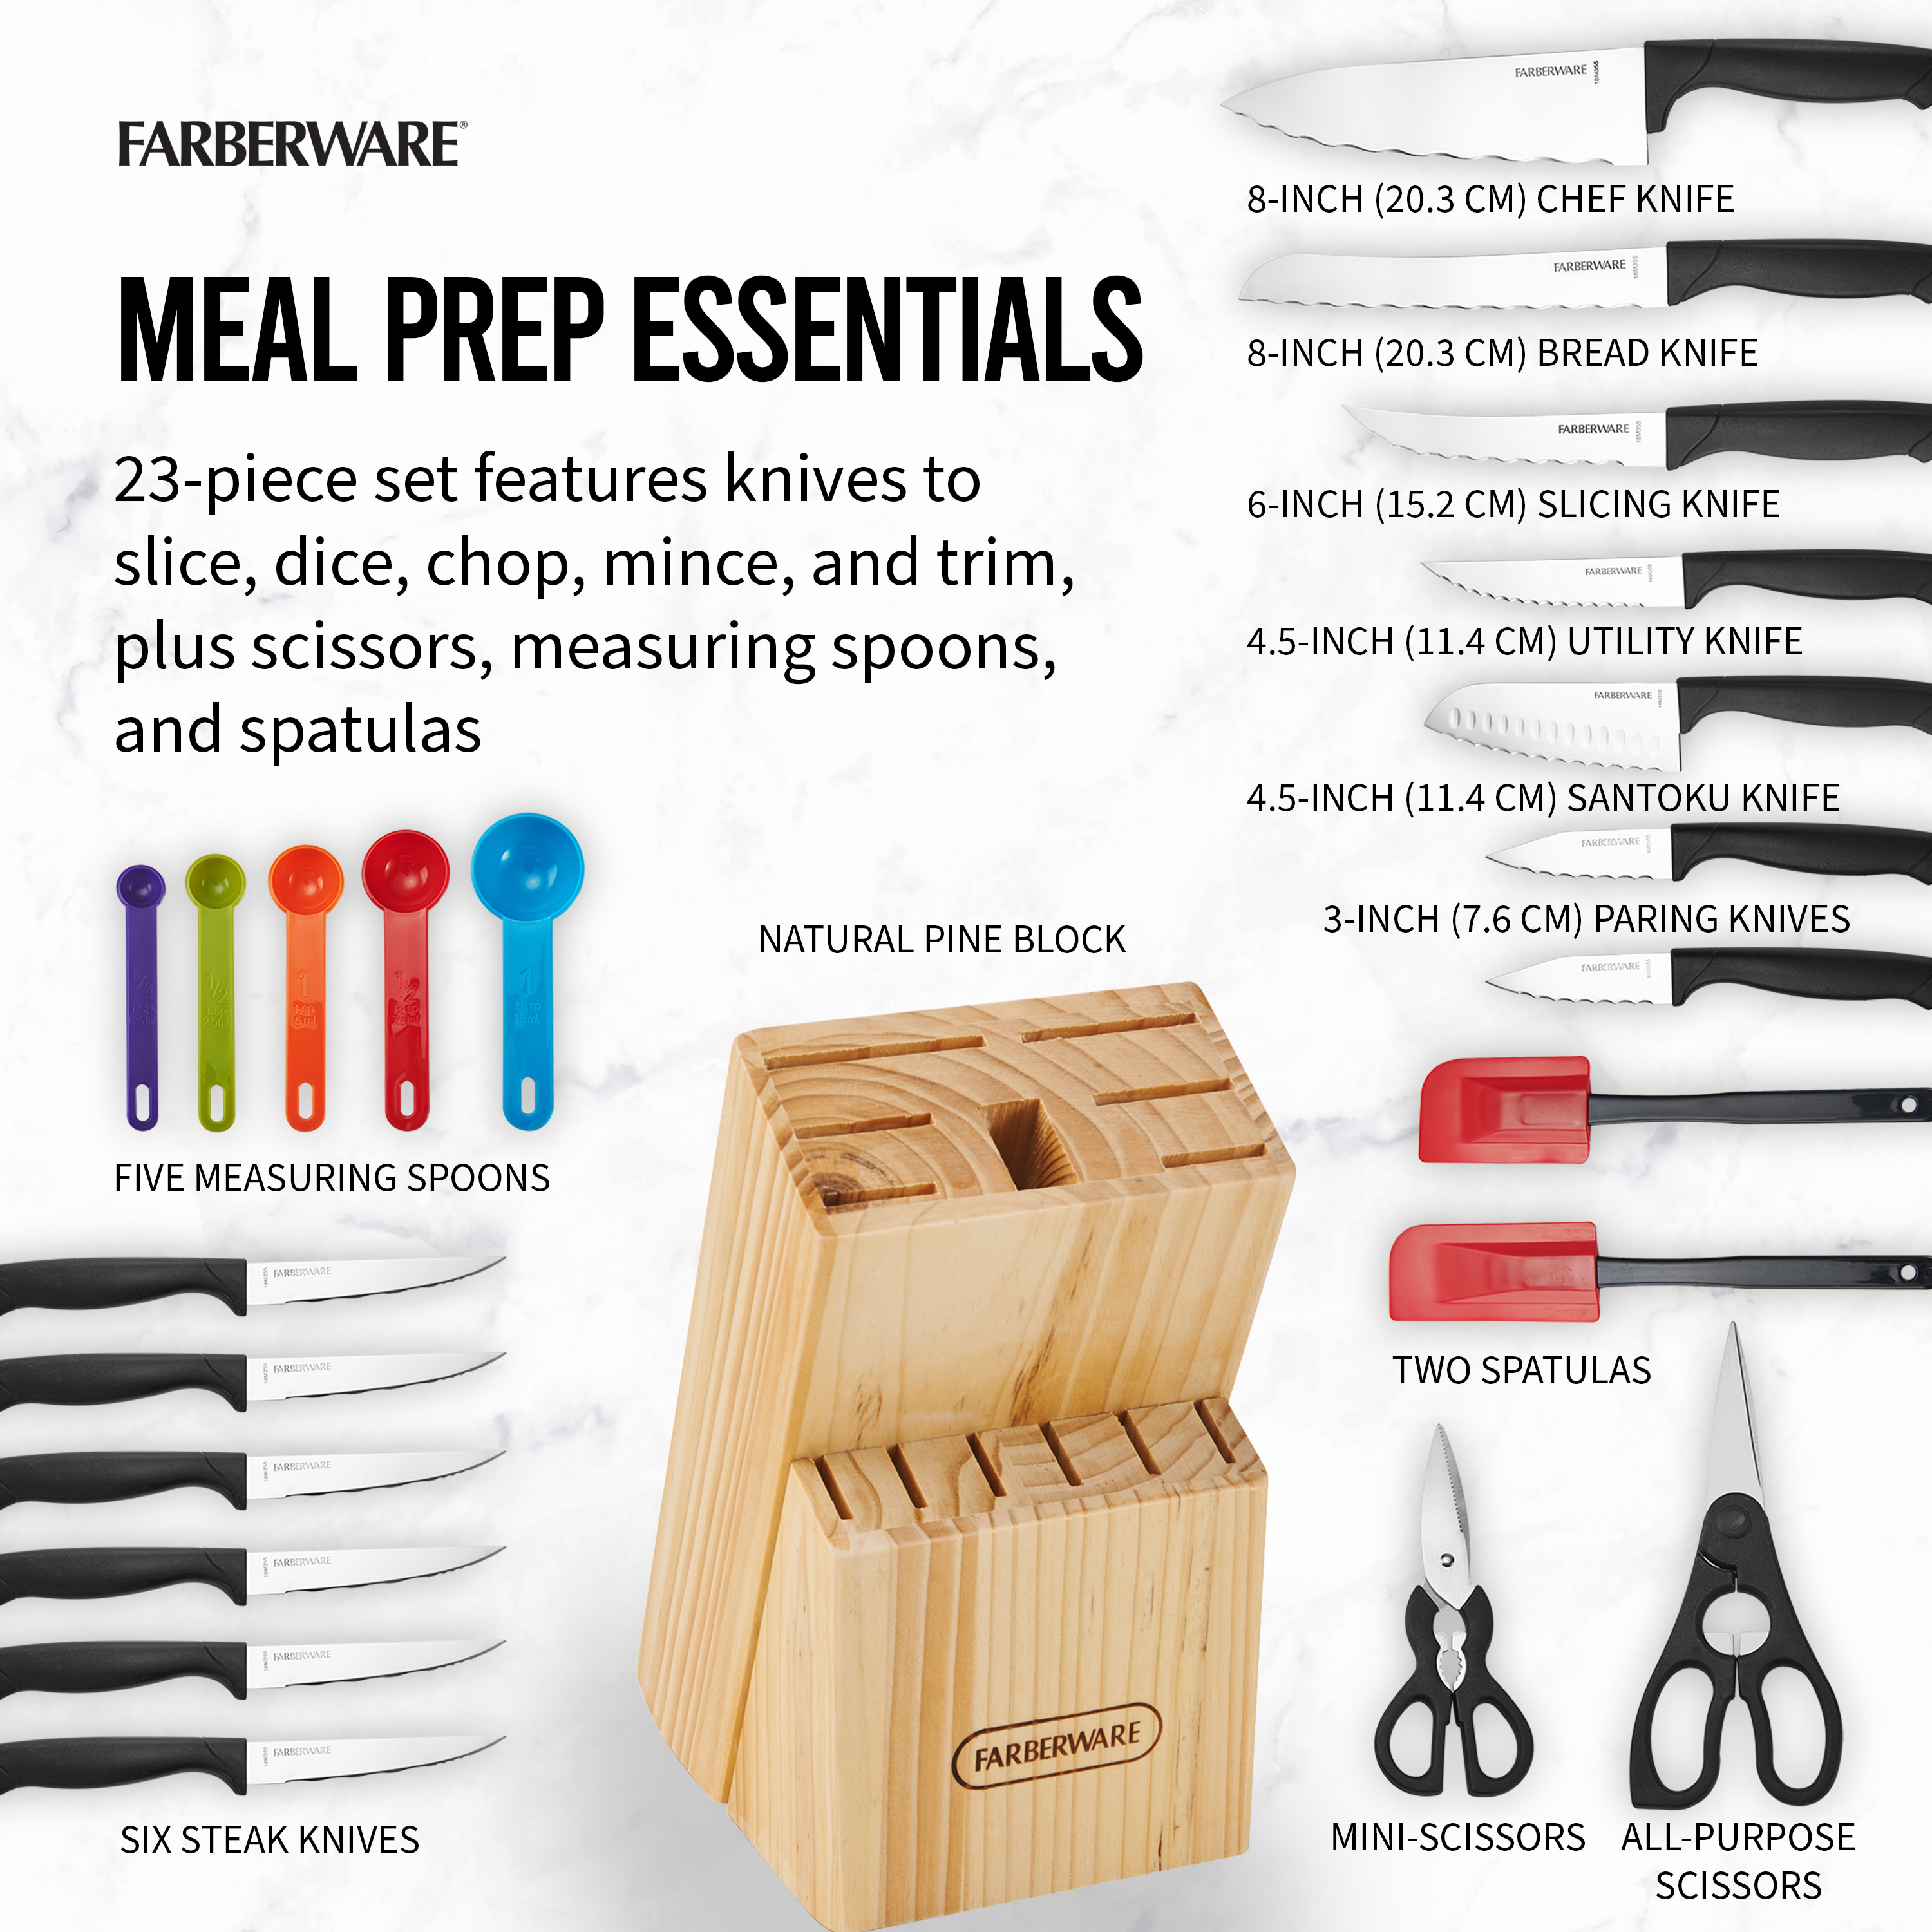 Farberware Classic 23 Piece Never Needs Sharpening Dishwasher Safe Stainless Steel Cutlery and Utensil Set in Black - image 5 of 23